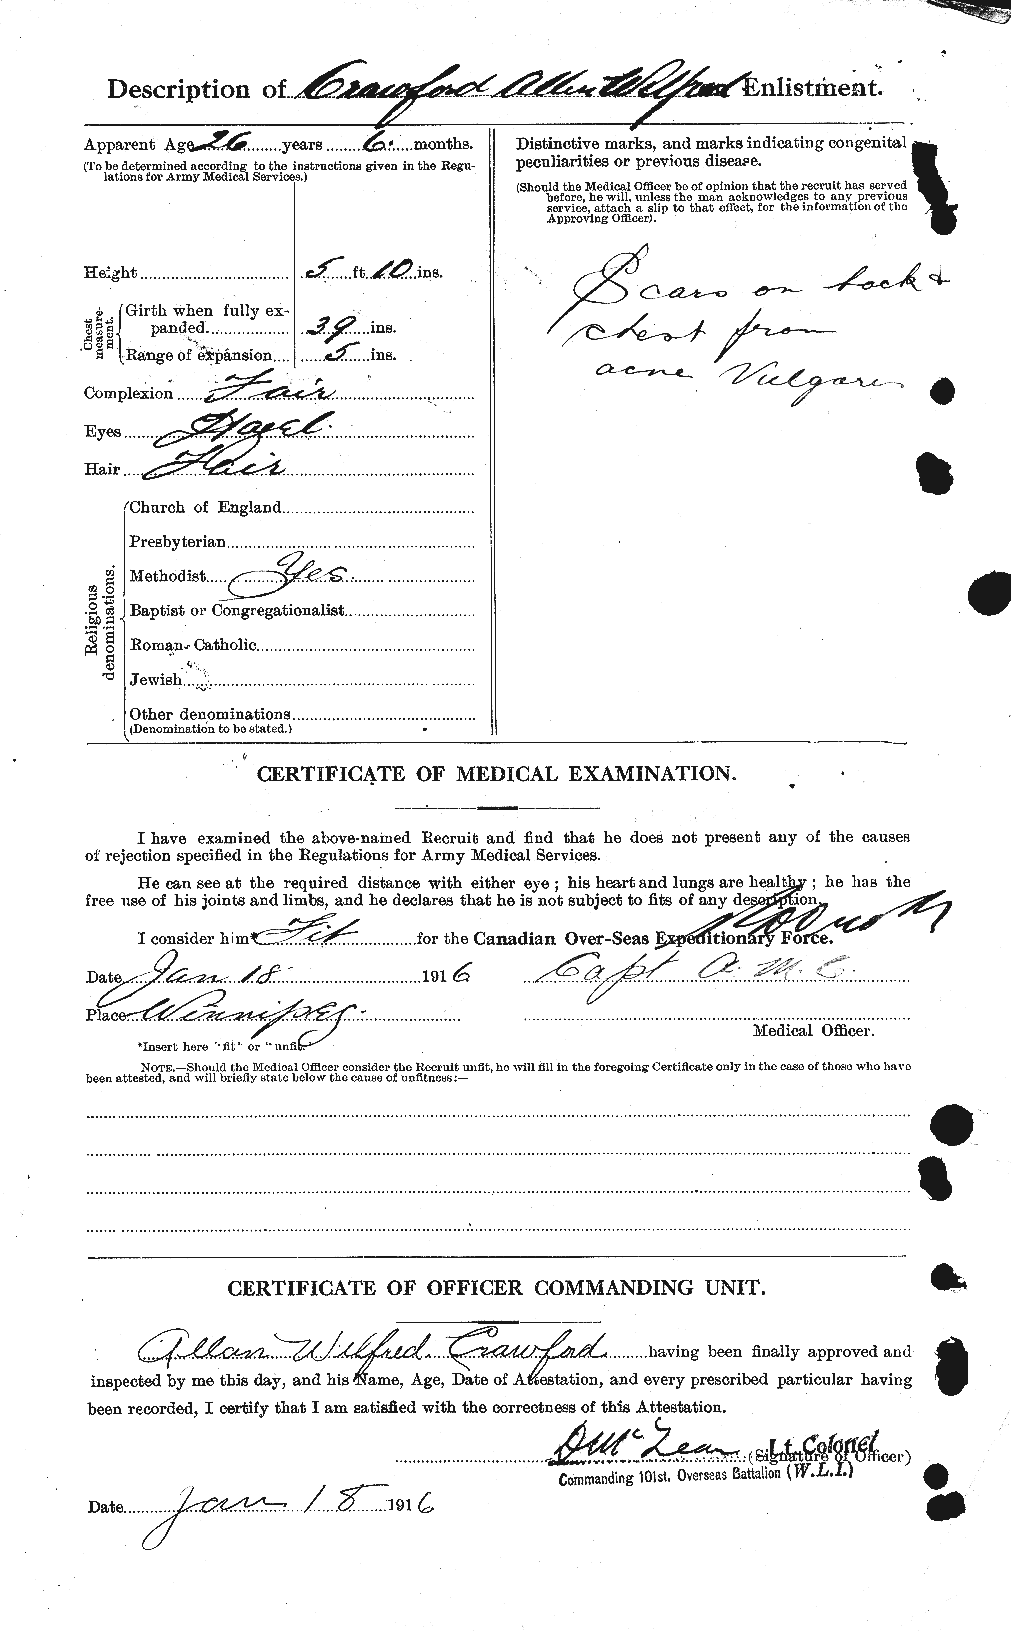 Personnel Records of the First World War - CEF 060947b